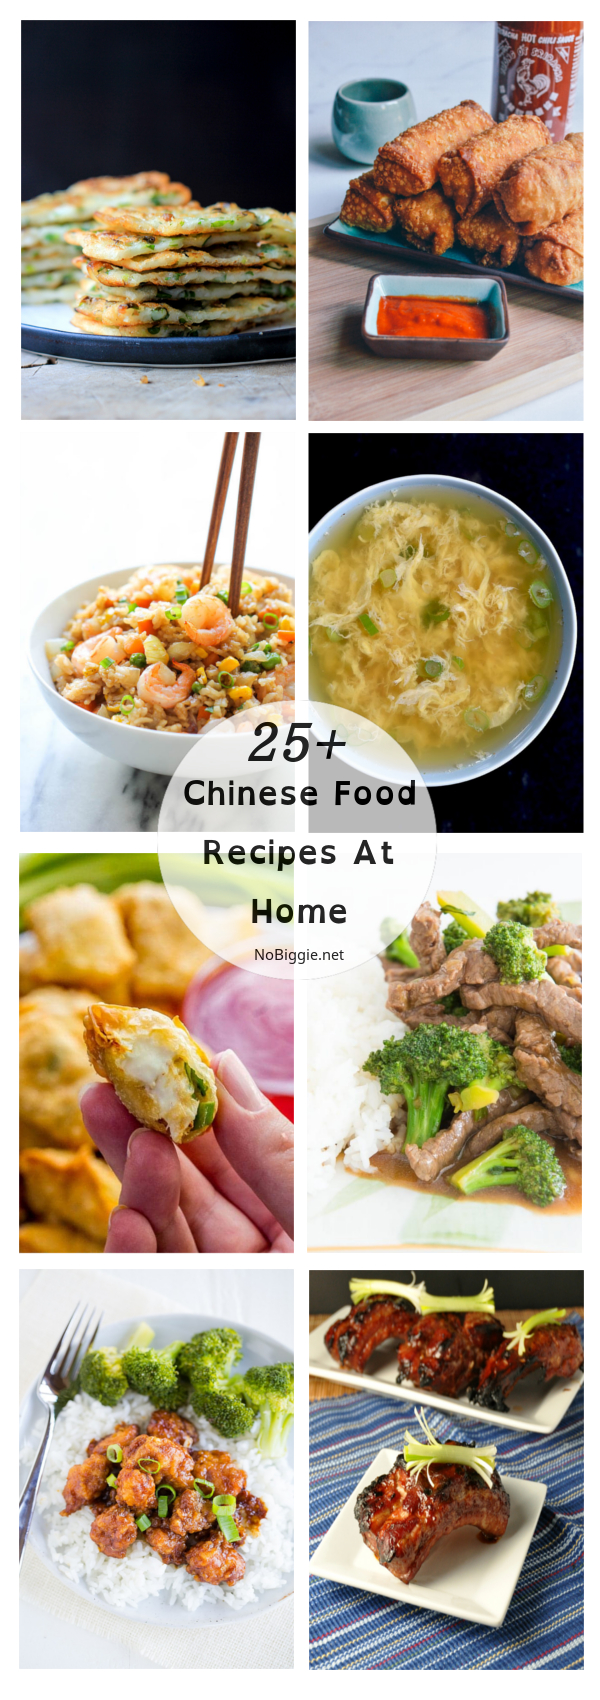 25+ Chinese Food Recipes at Home | NoBiggie.net